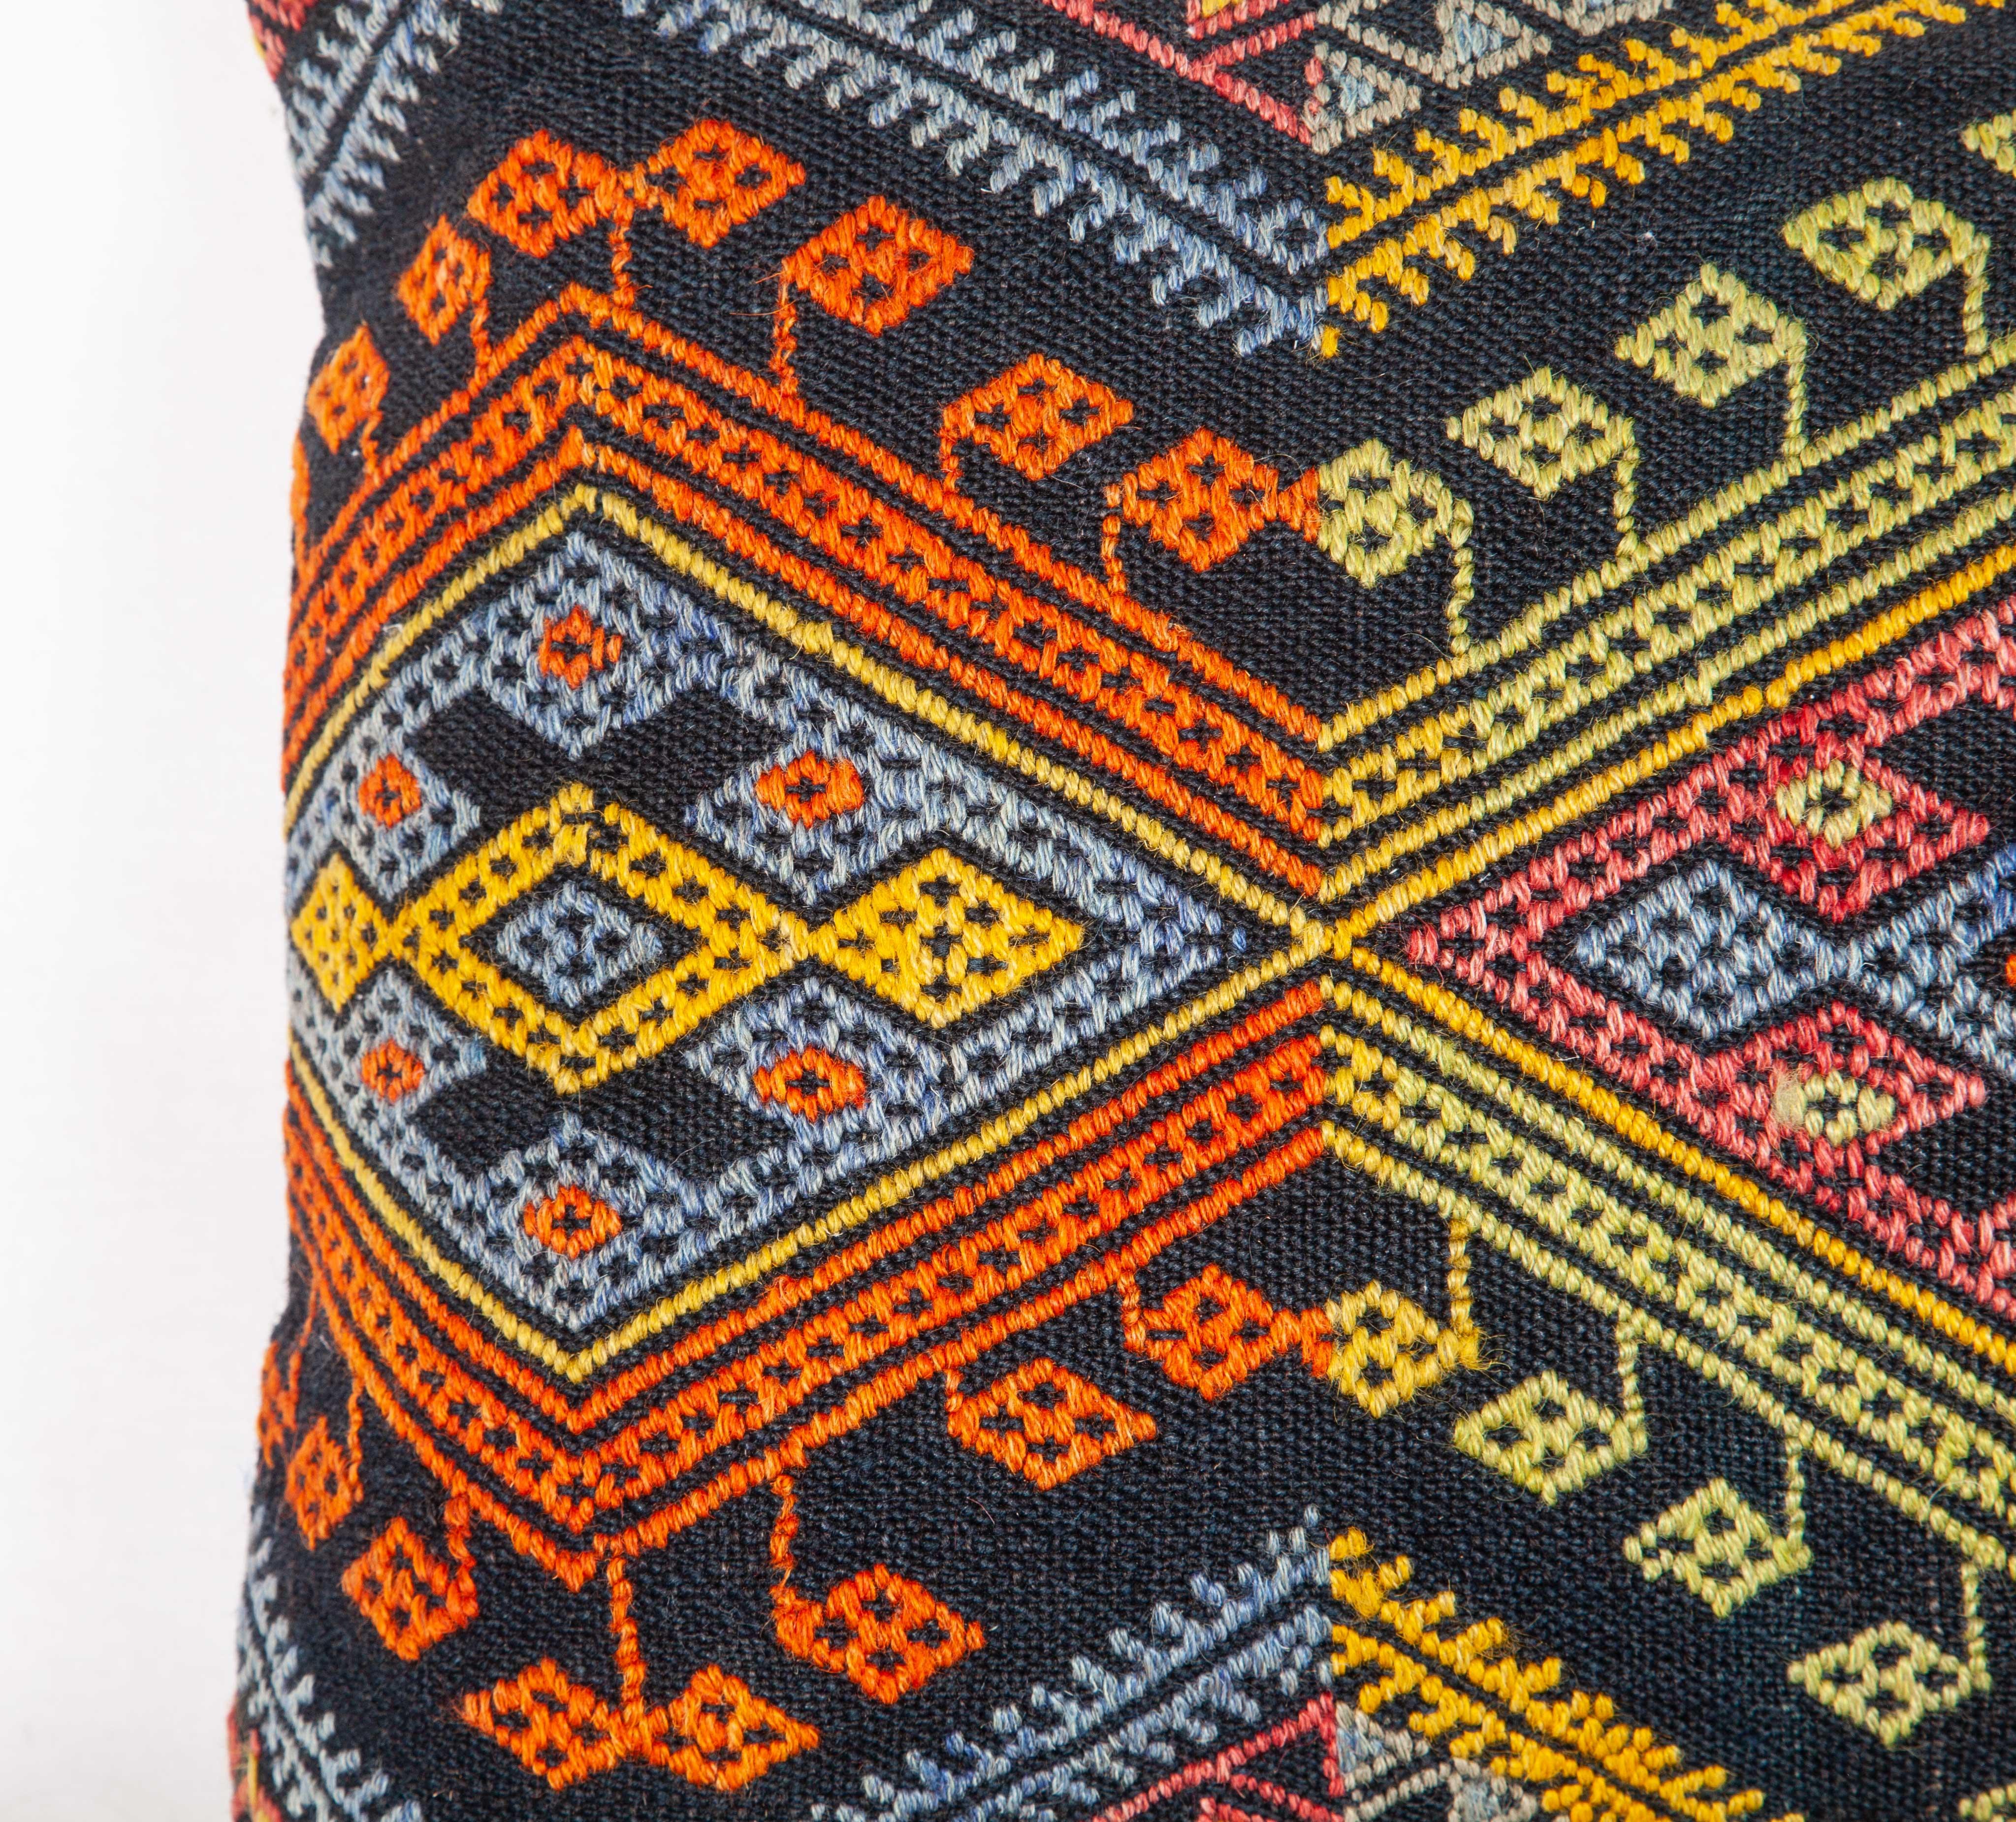 Hand-Woven Antique Kilim Pillow Cases Made from a Late 19th Century Anatolian Cicim Kilim